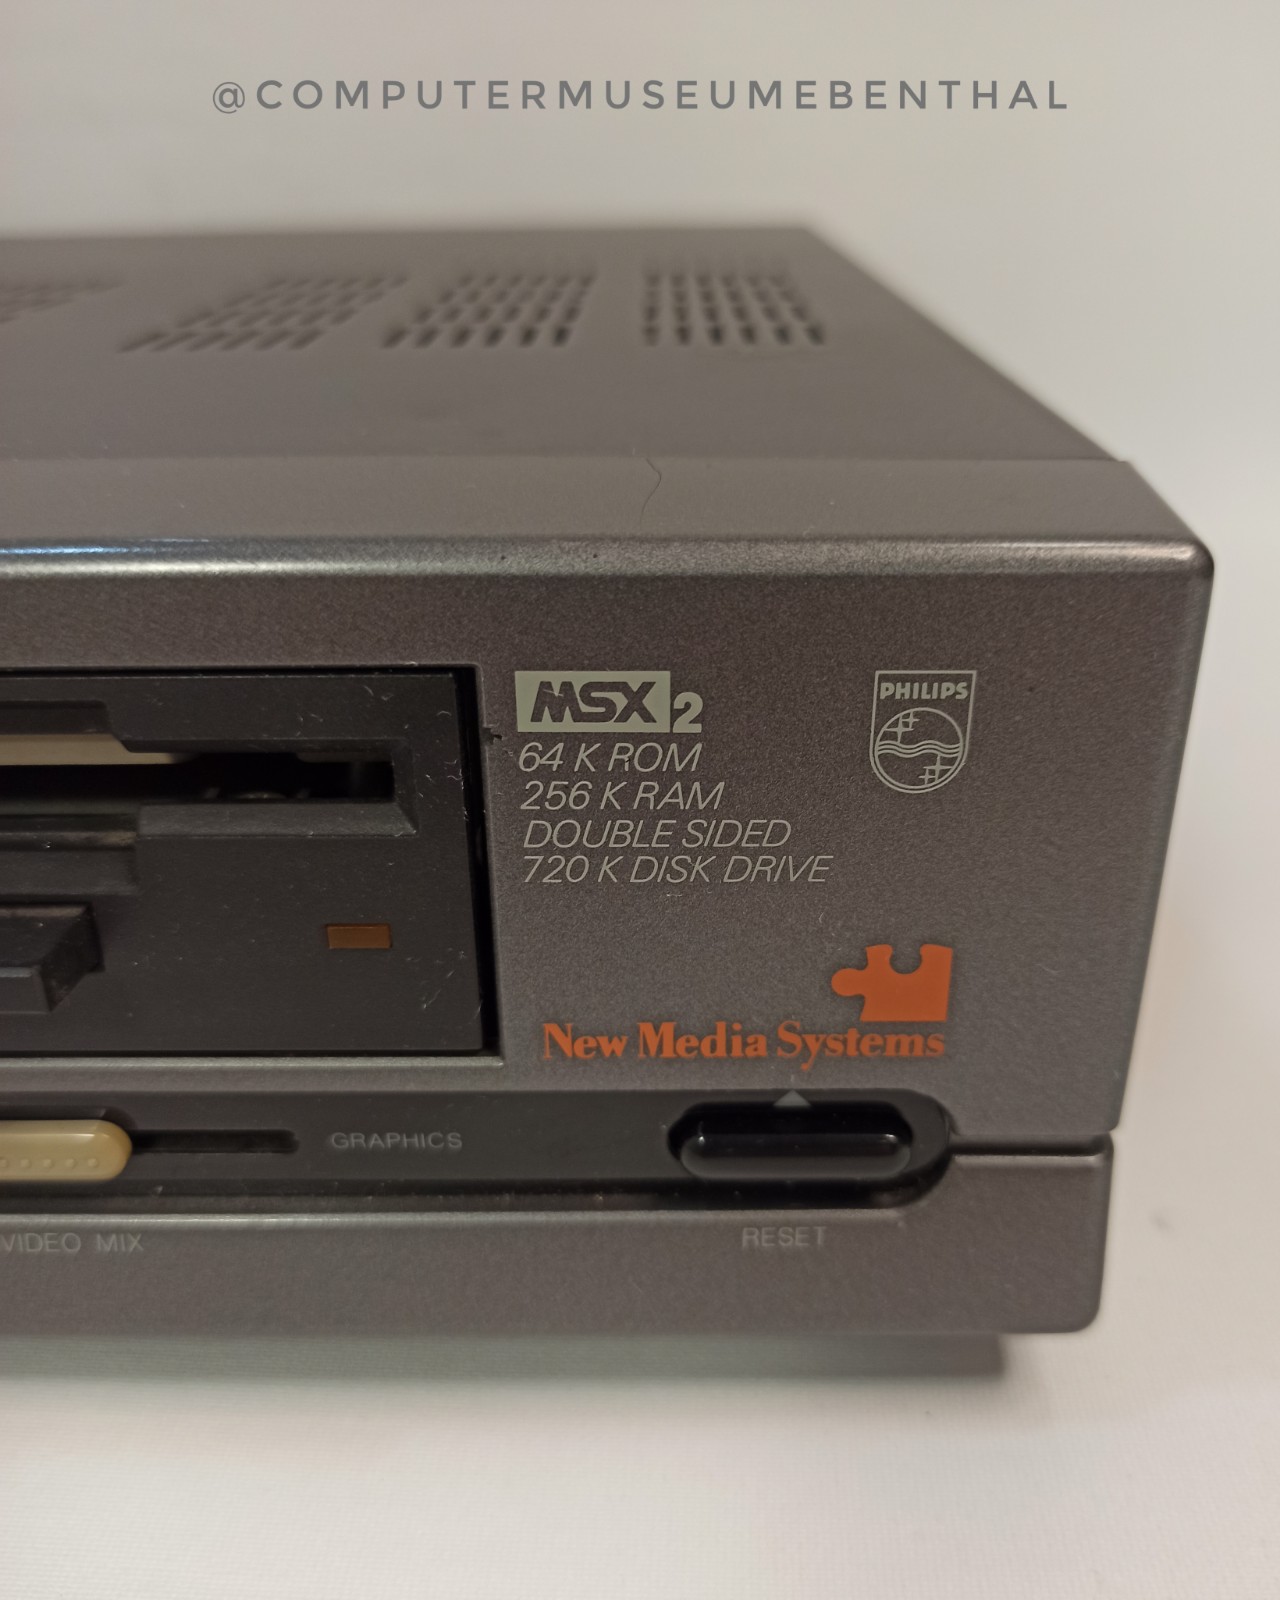 Philips NMS 8280